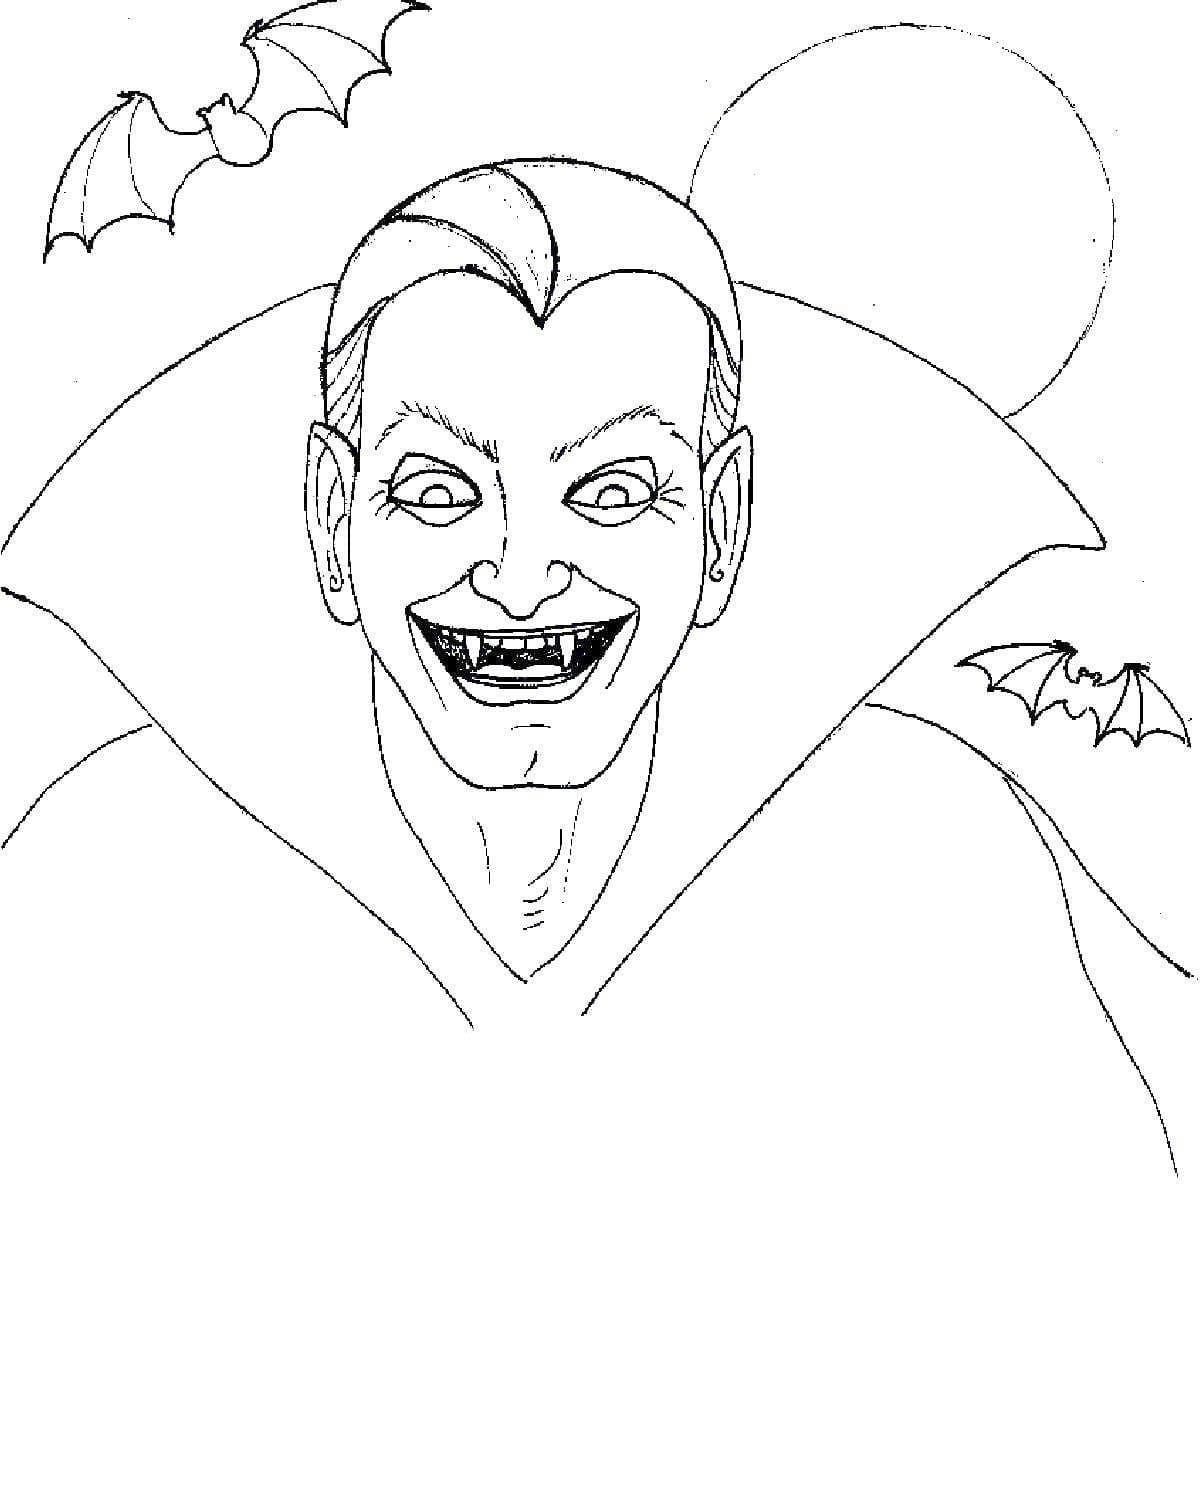 Scary Dracula coloring page - Download, Print or Color Online for Free